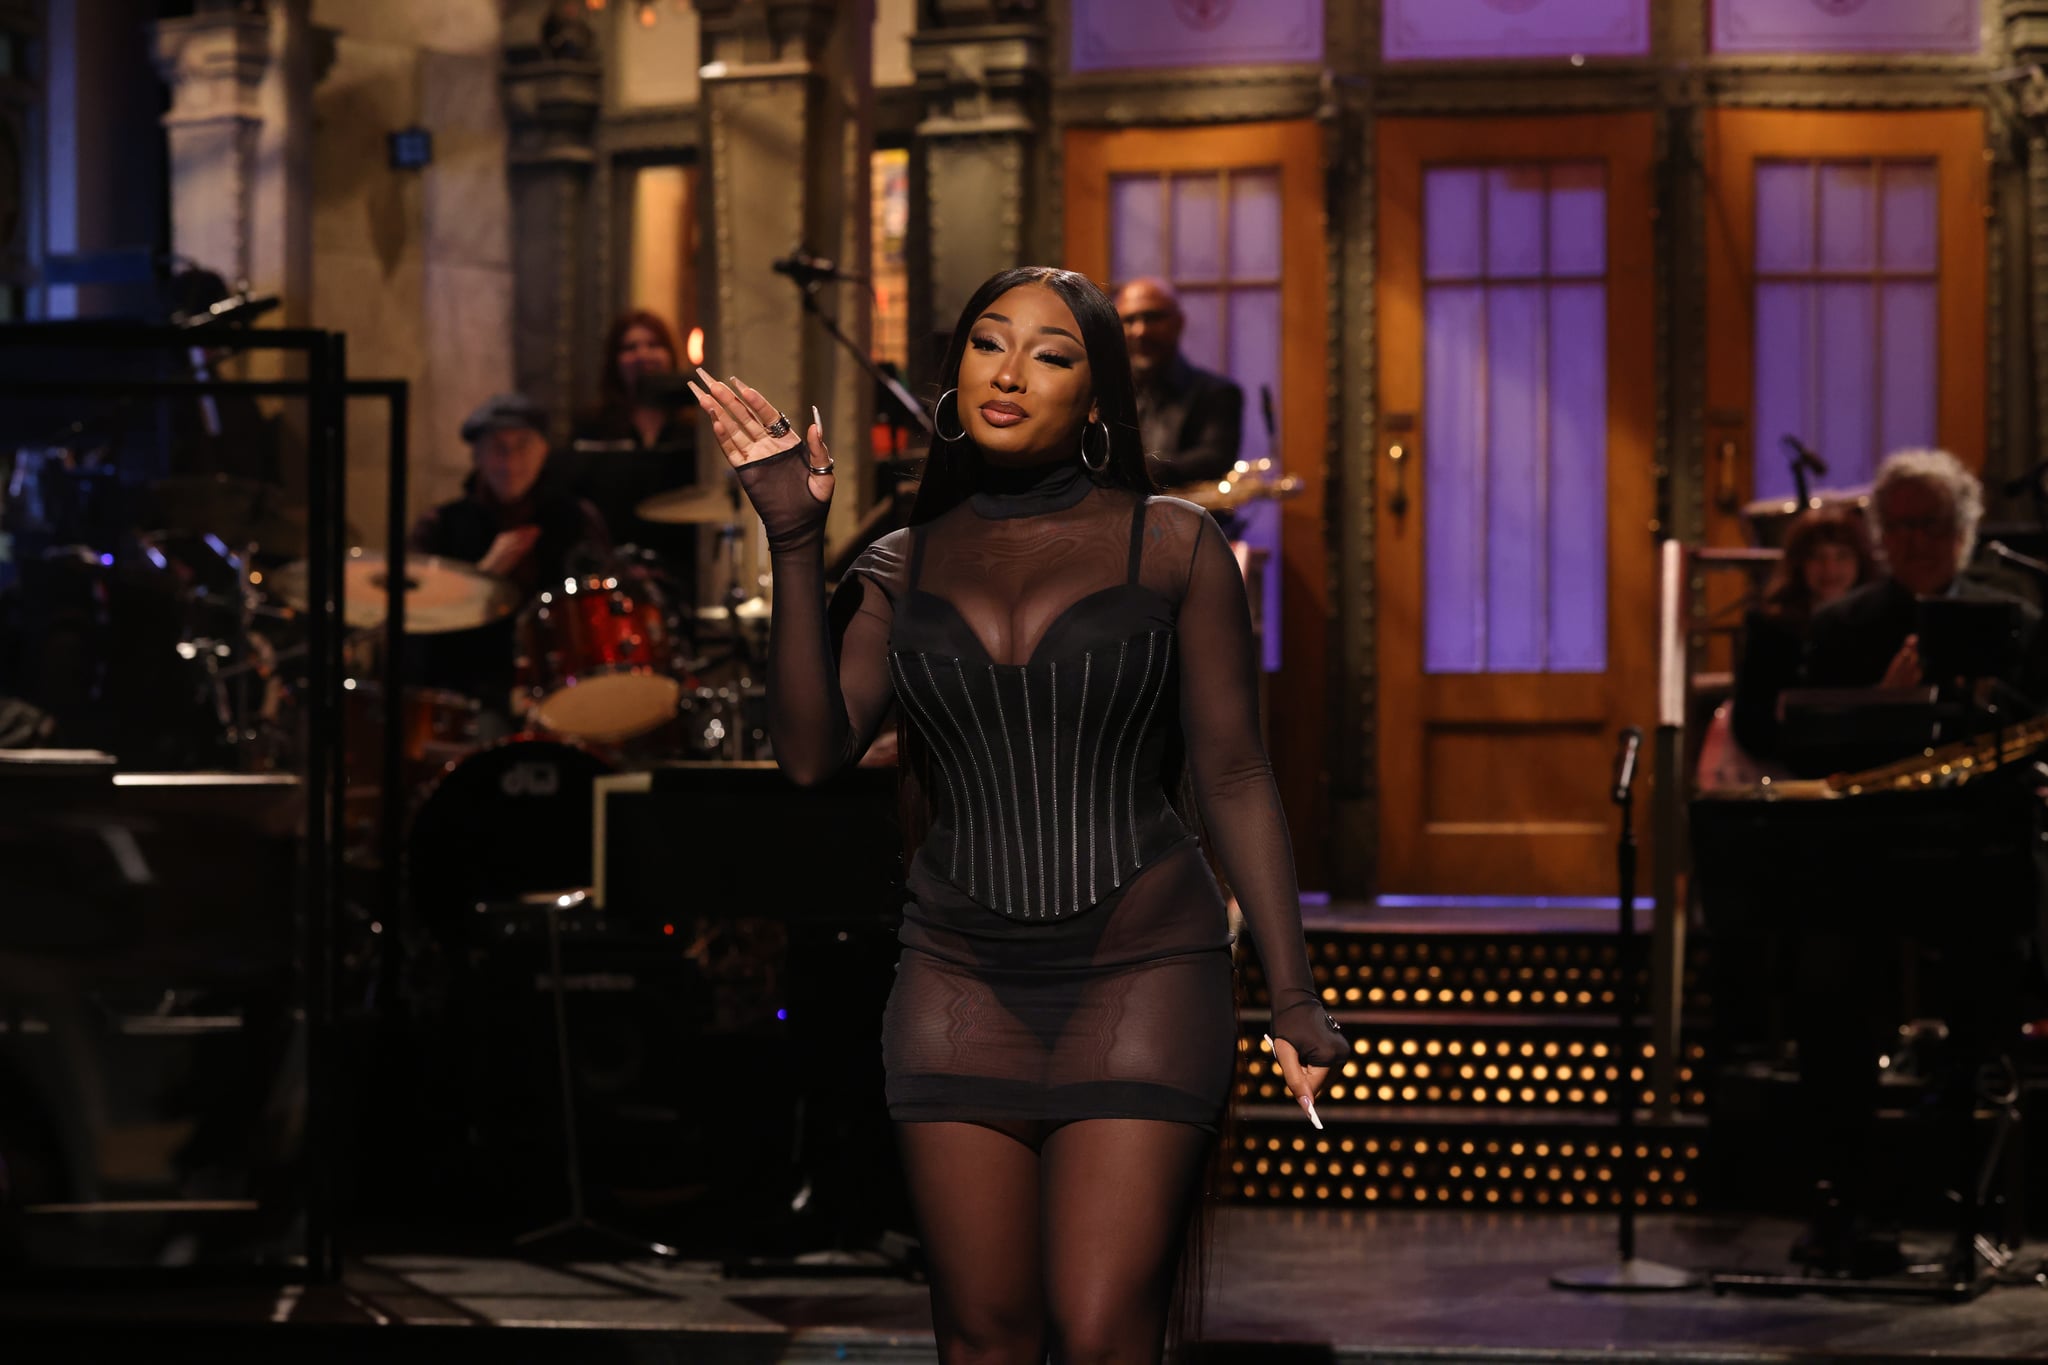 SATURDAY NIGHT LIVE -- Megan Thee Stallion Episode 1829 -- Pictured: Host Megan Thee Stallion during the Monologue on Saturday, October 15, 2022 -- (Photo by: Will Heath/NBC via Getty Images)